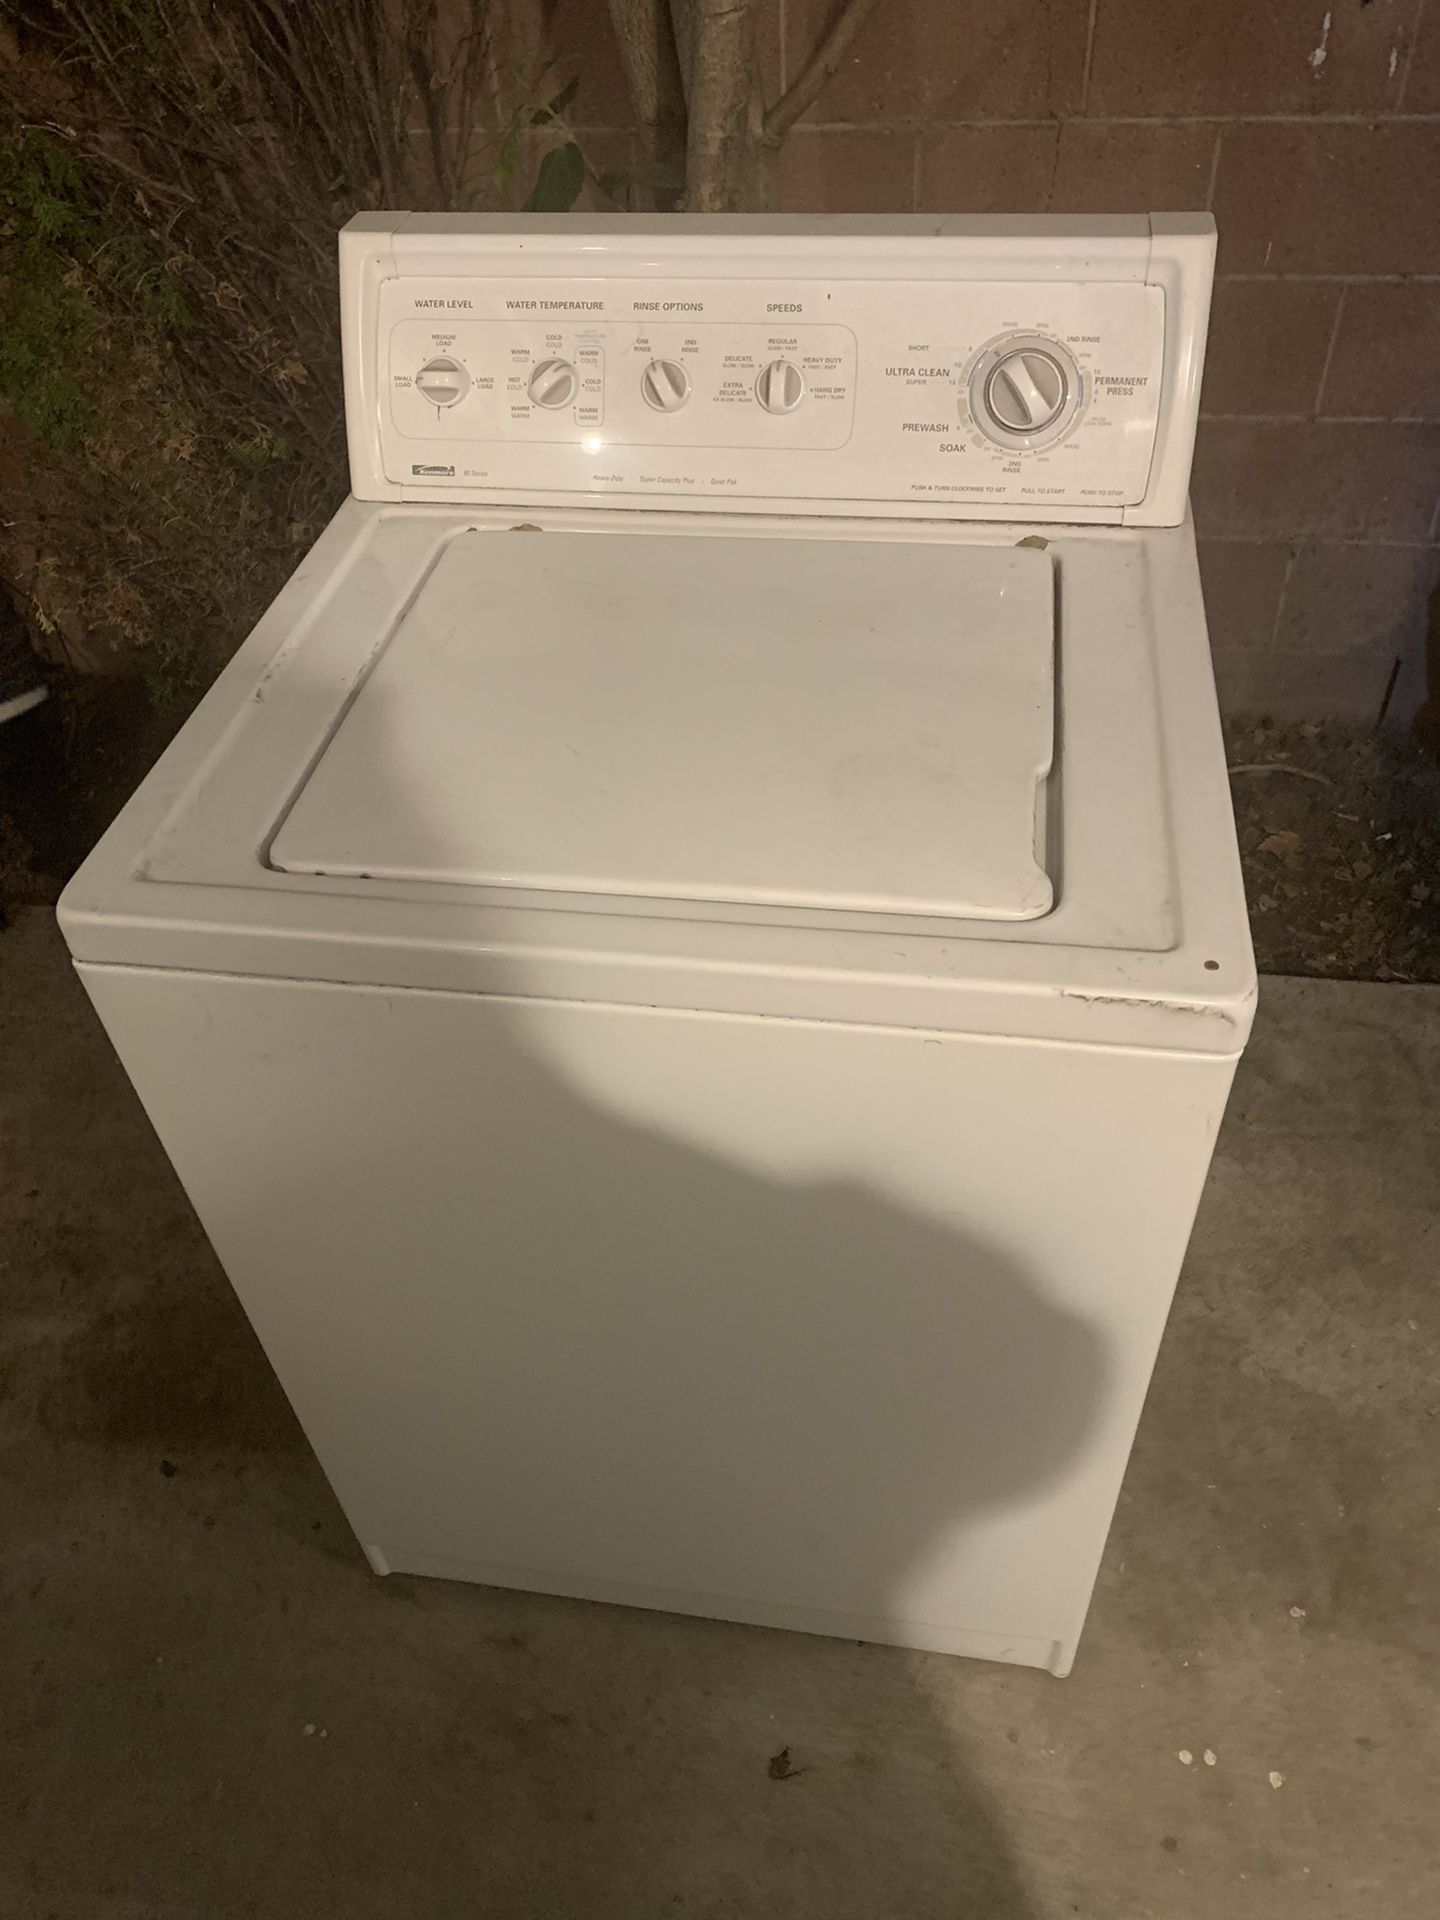 $60 KENMORE WASHER